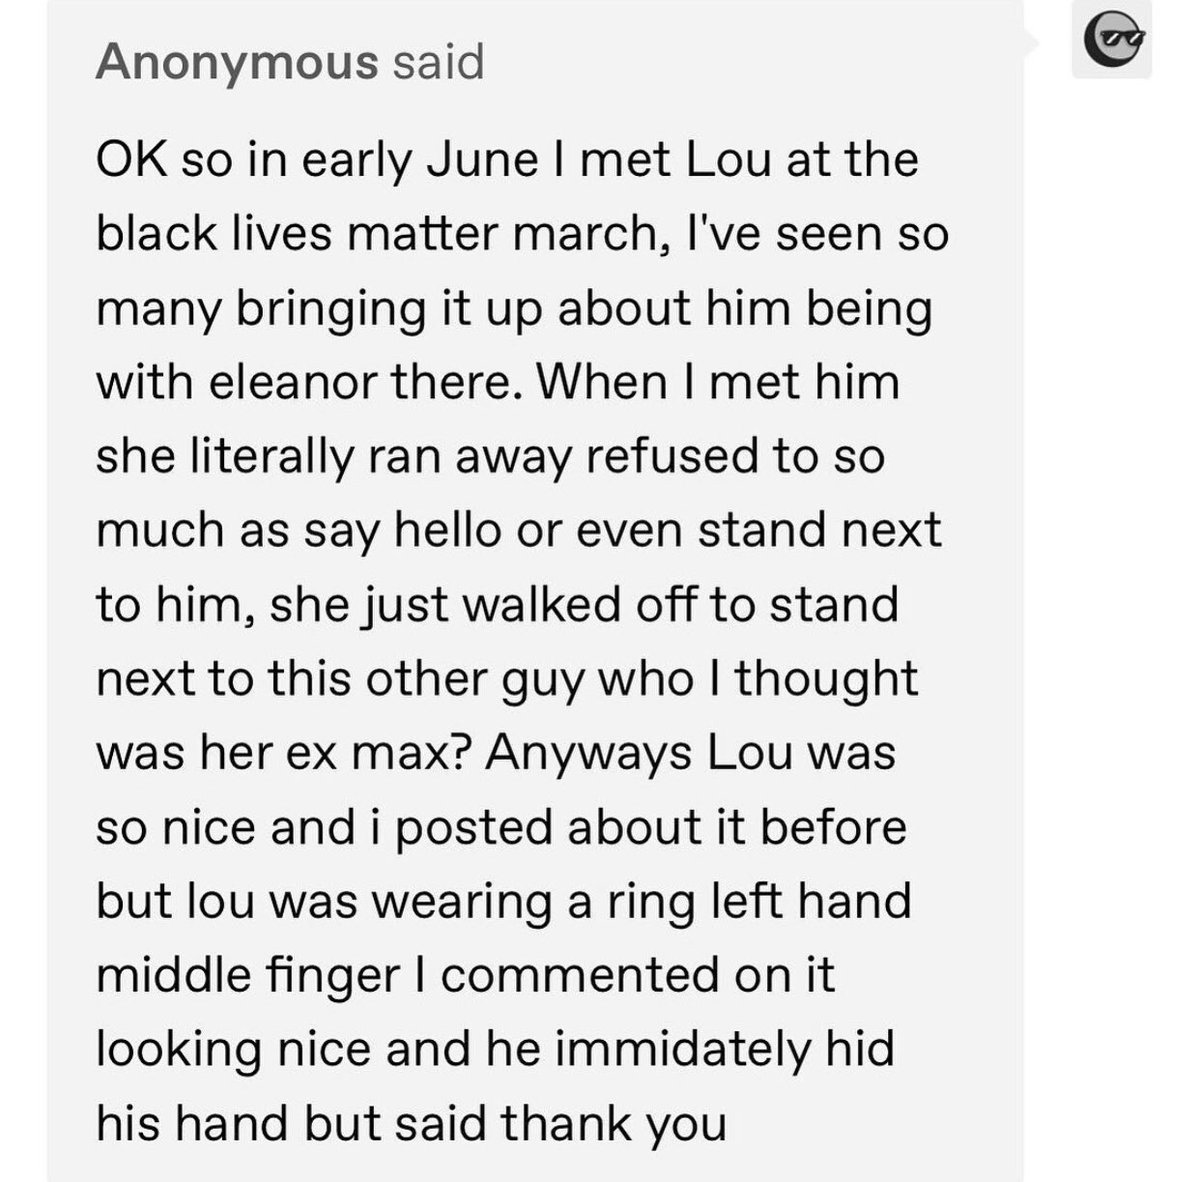 This is the most recent proof and receipt that we've gotten of Lou wearing a ring. Now it's upto you whether you'd like to believe it or not. But it does seem quite believable to me.